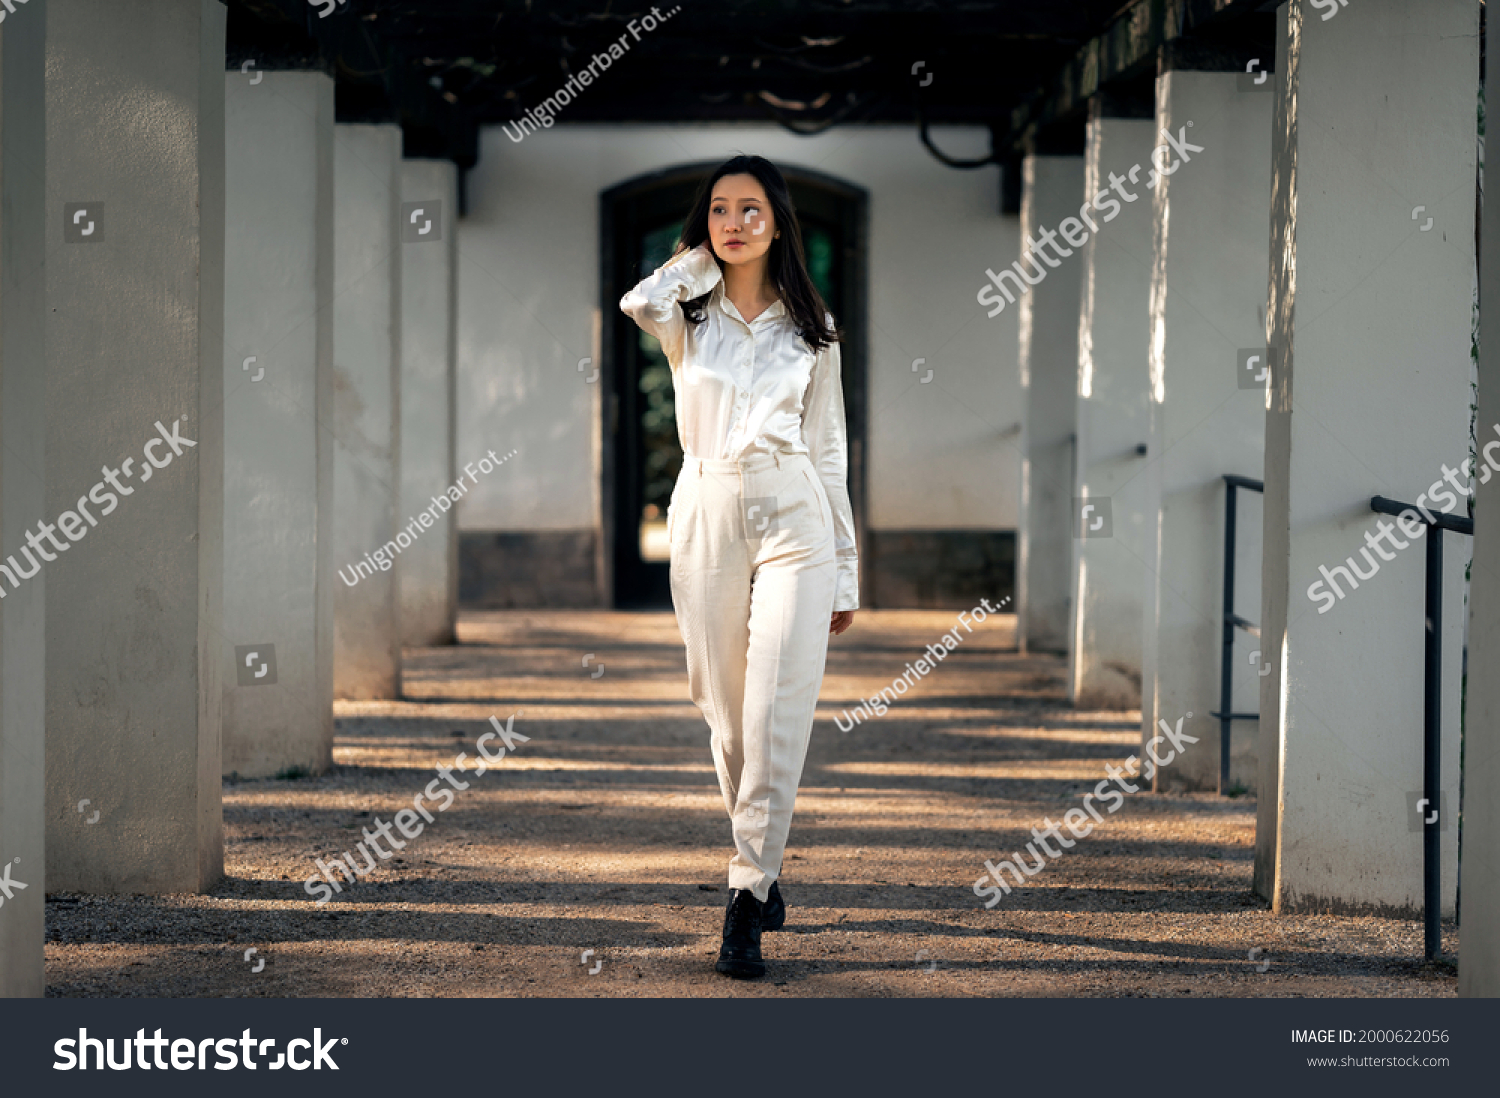 Asian girl with long black hair outdoor, asian woman in white clothes, lifstyle photo of woman in whine shirt and trousers outside, beautiful chinese woman in white outfit #2000622056